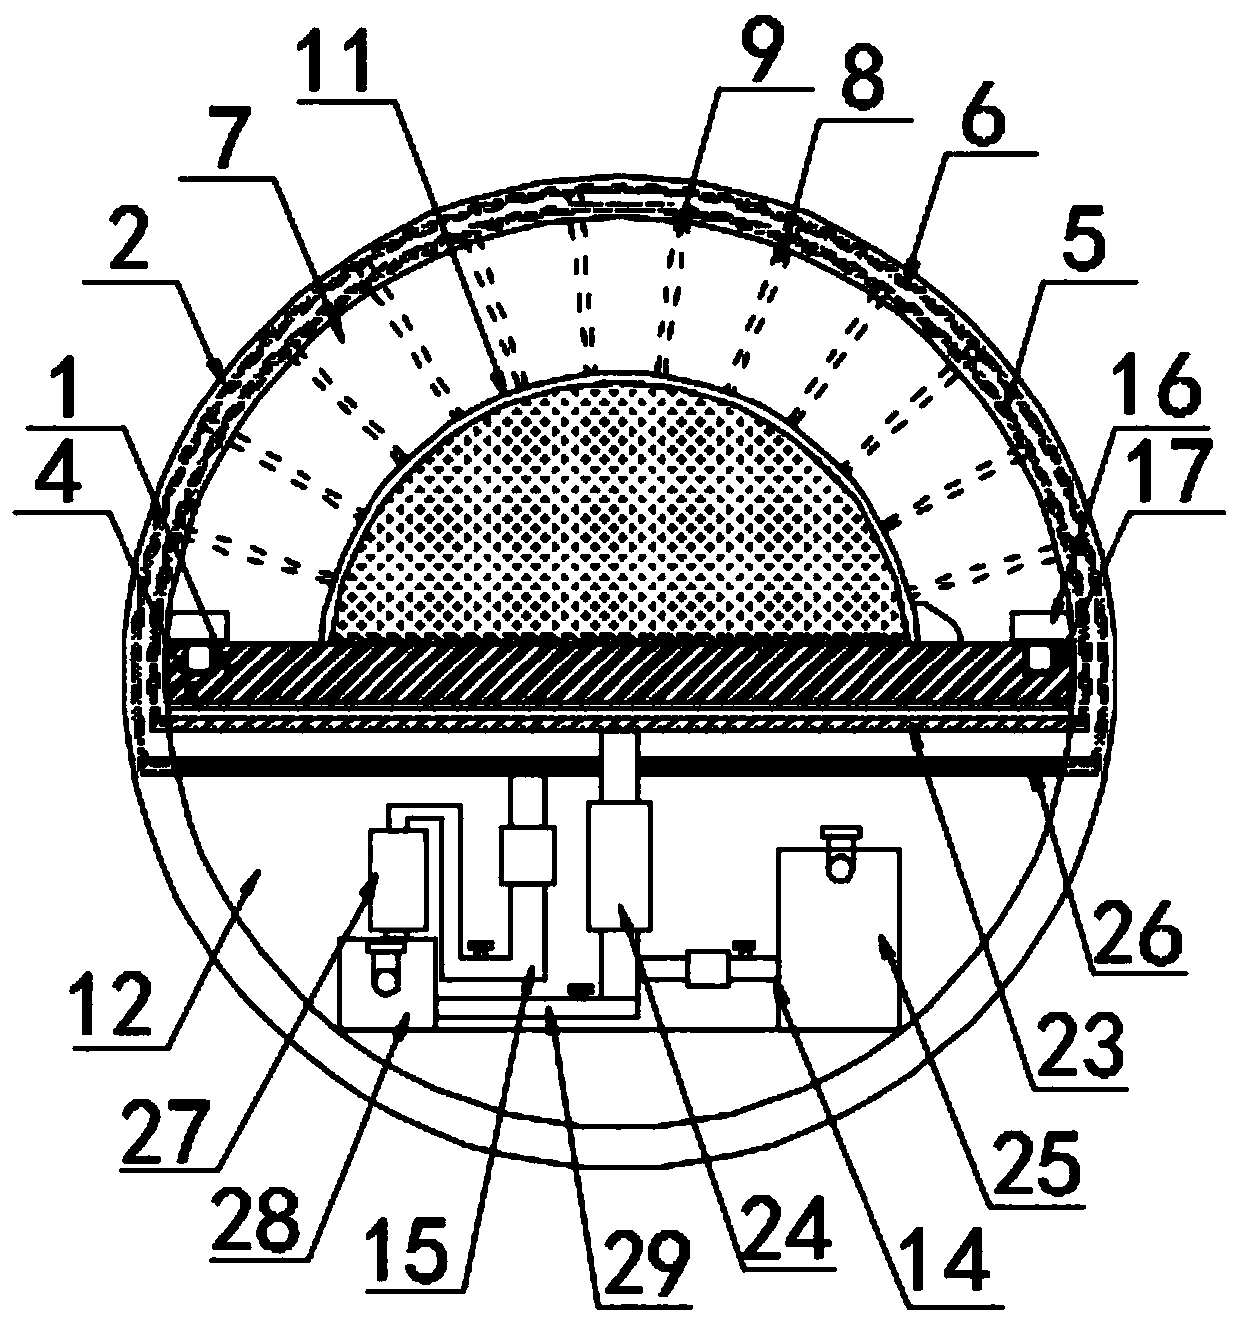 Reproductive department auxiliary treatment device